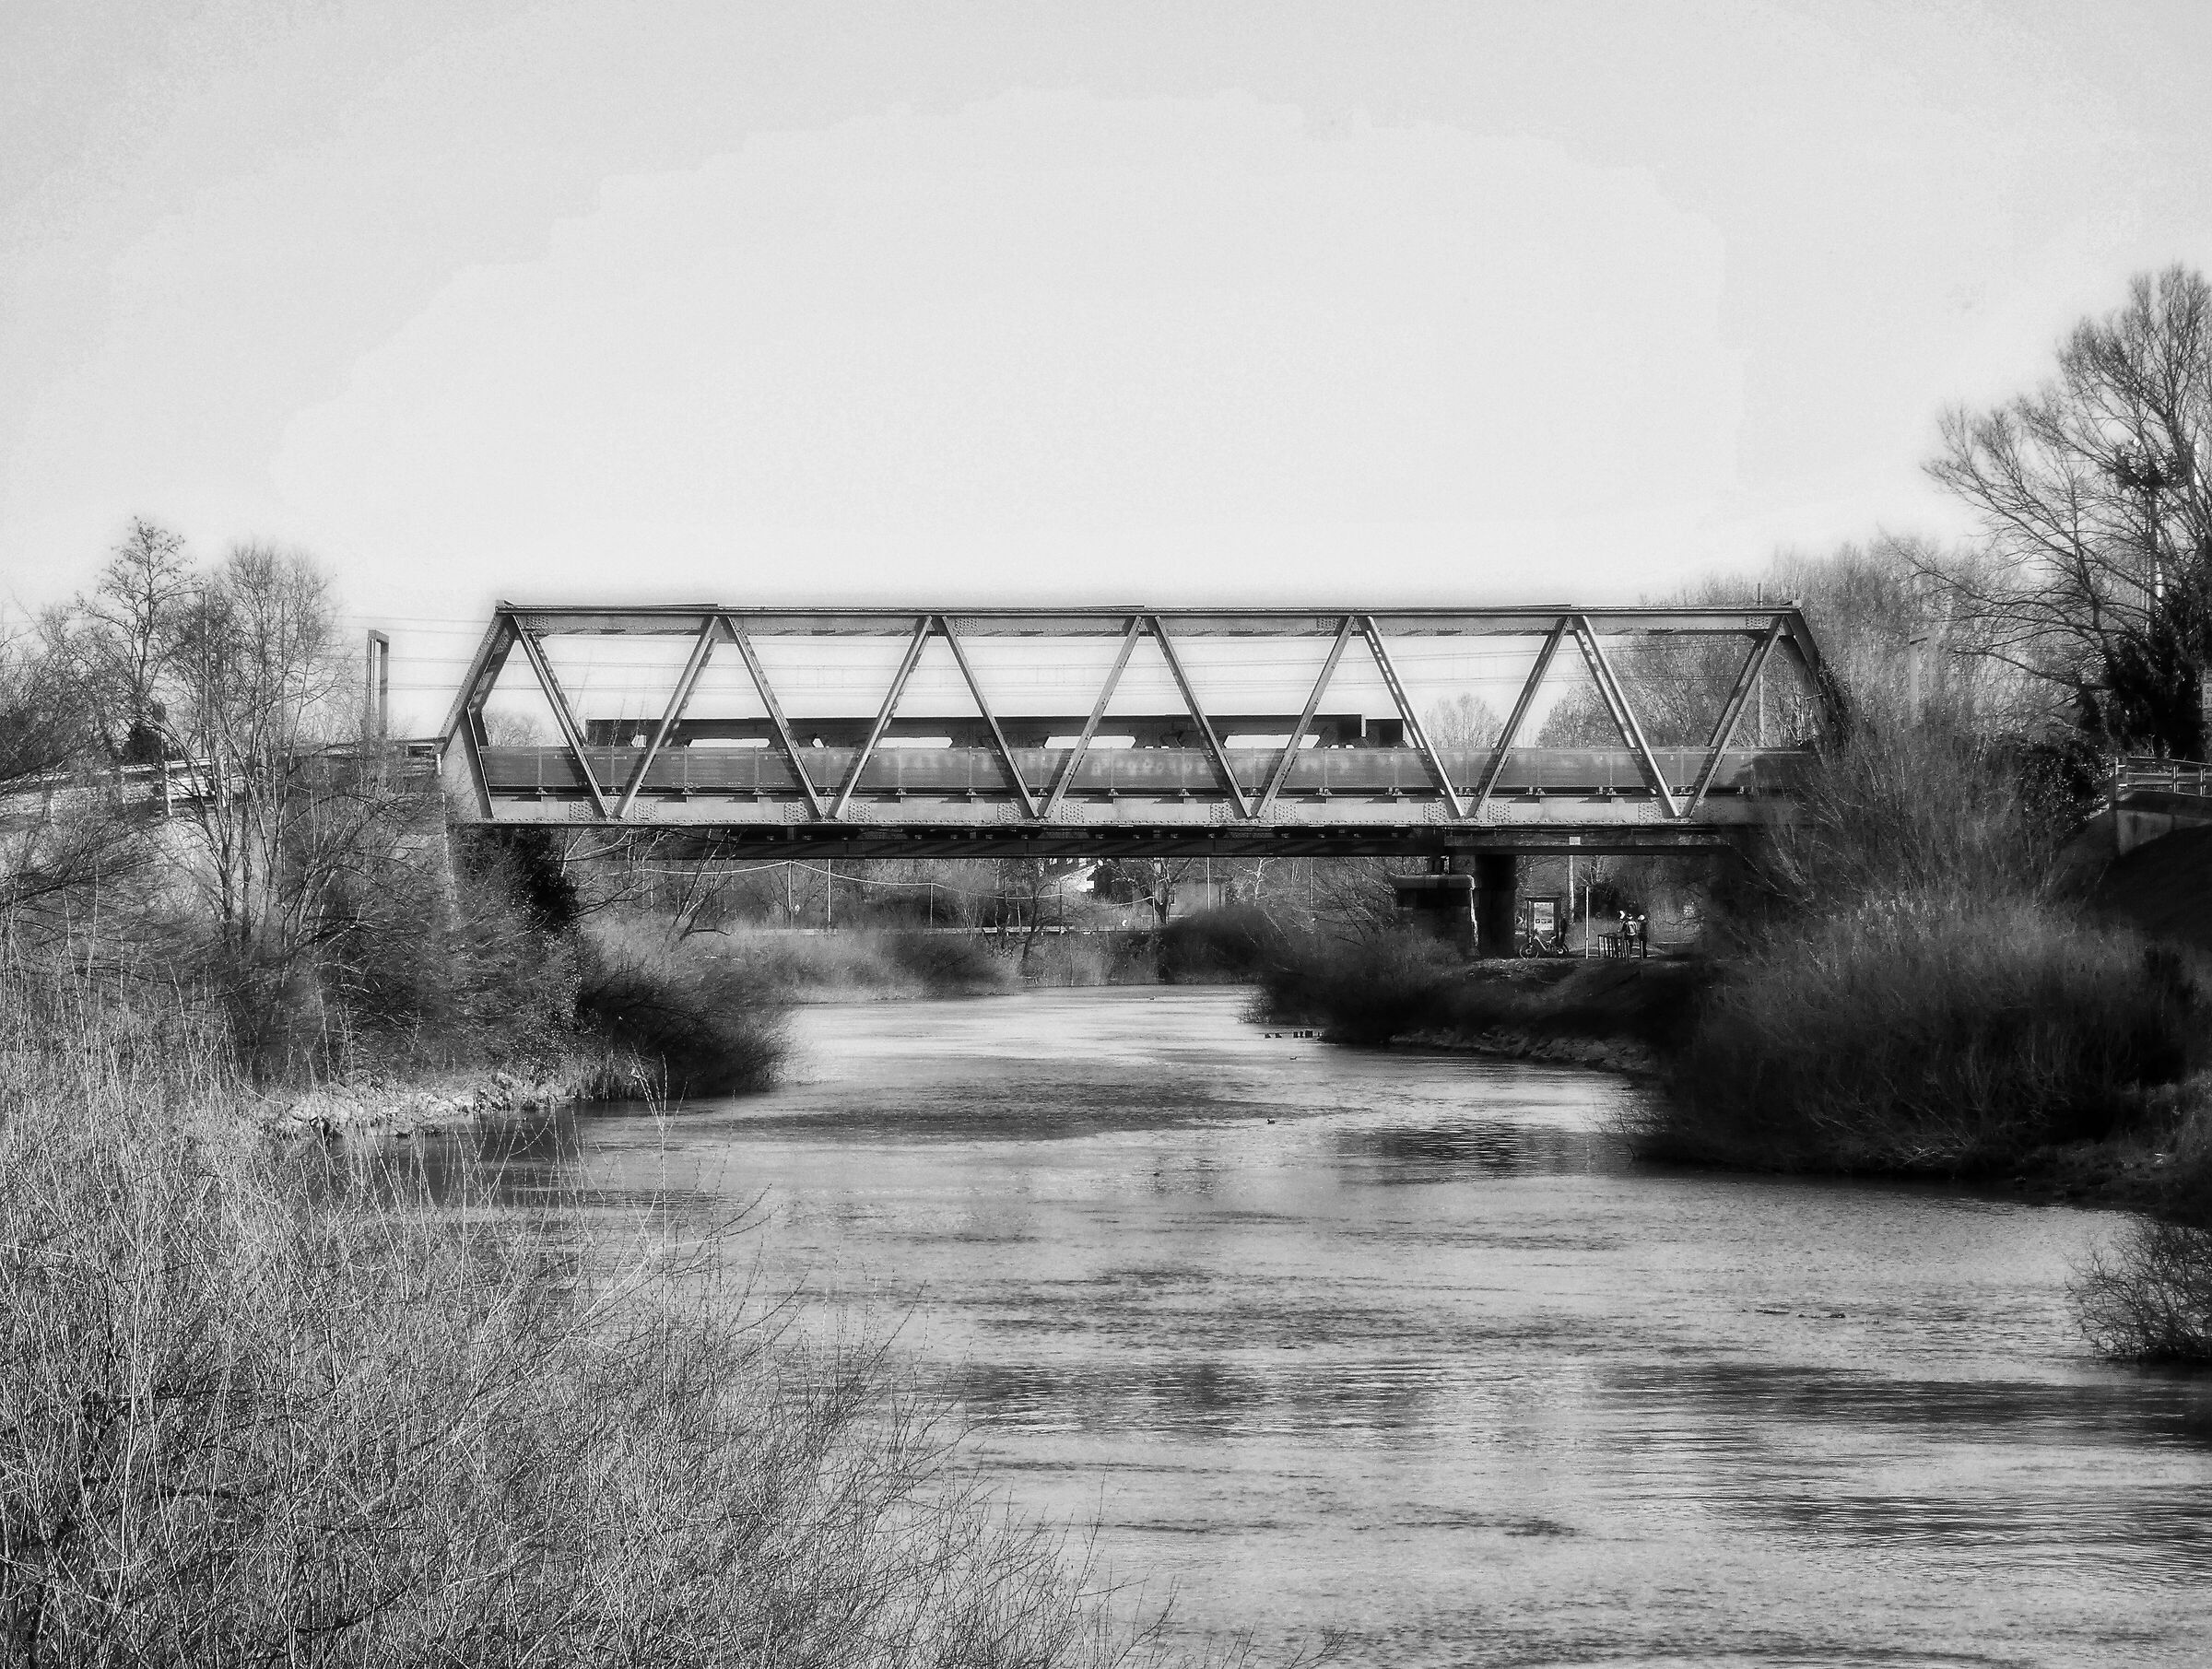 Contrasts - bridges over the River Sile...